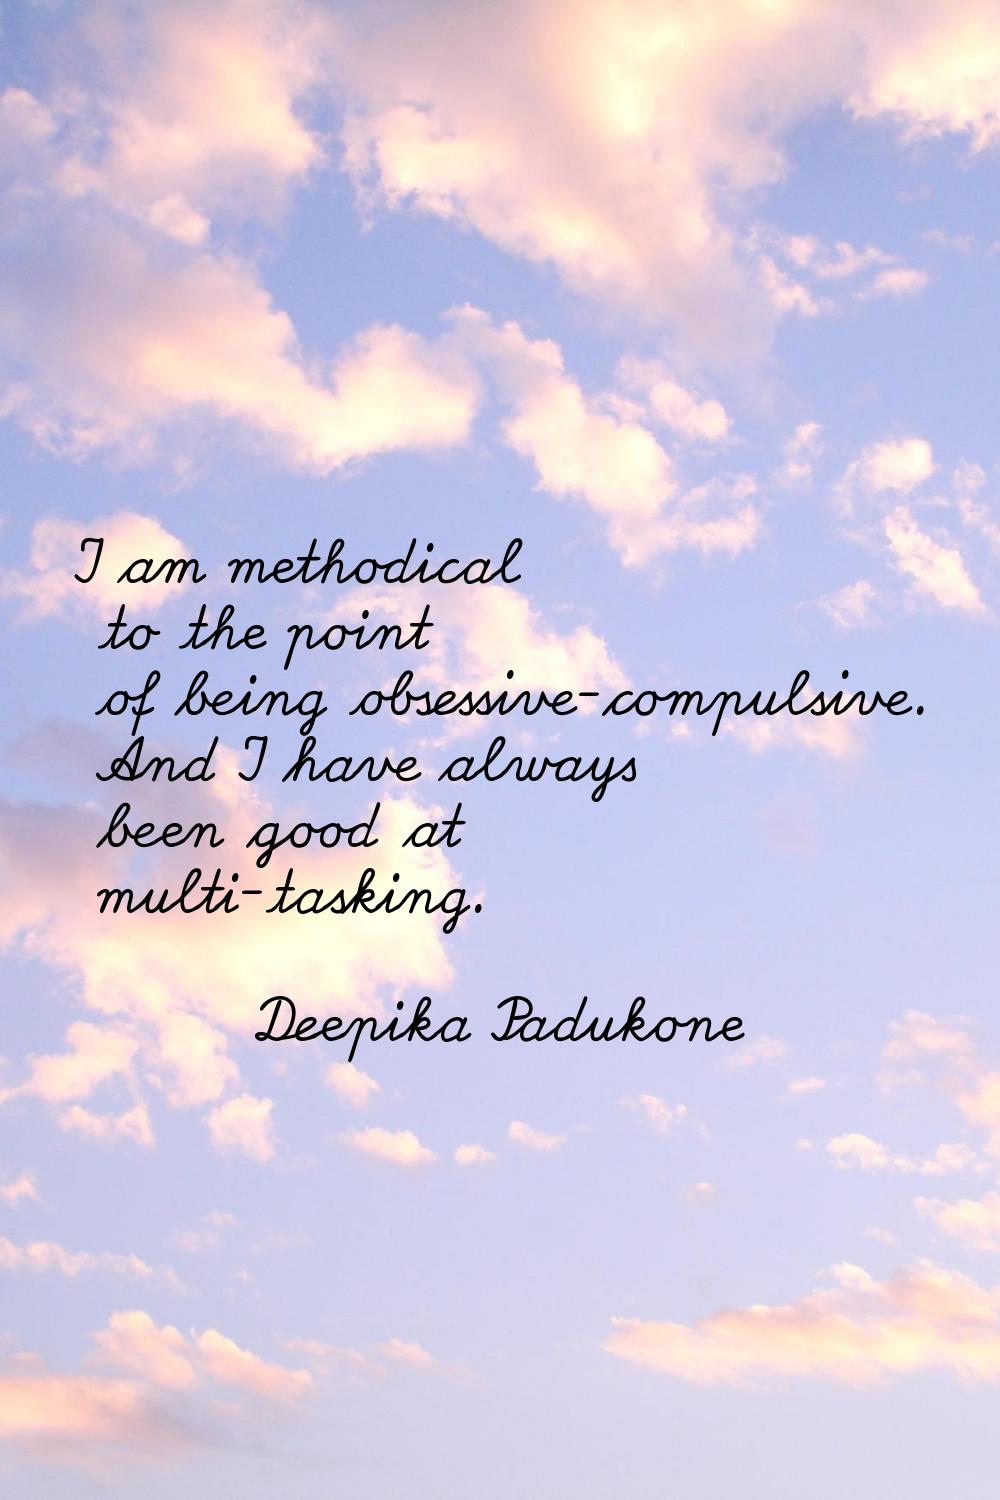 I am methodical to the point of being obsessive-compulsive. And I have always been good at multi-ta